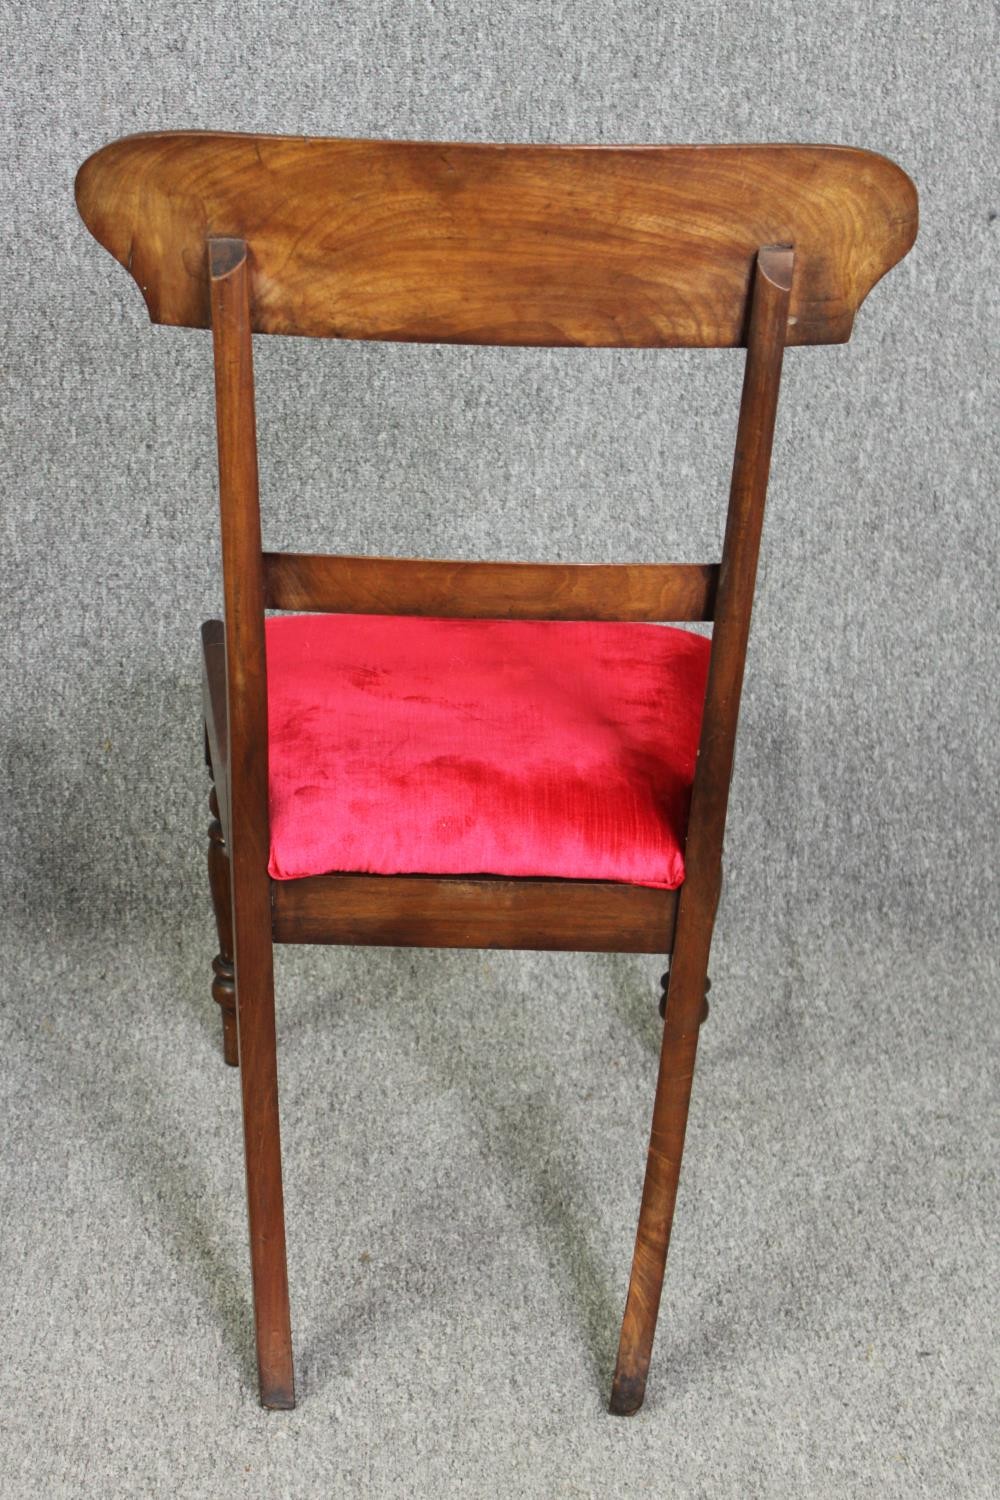 Dining chairs, a pair, mid 19th century mahogany. - Image 6 of 7